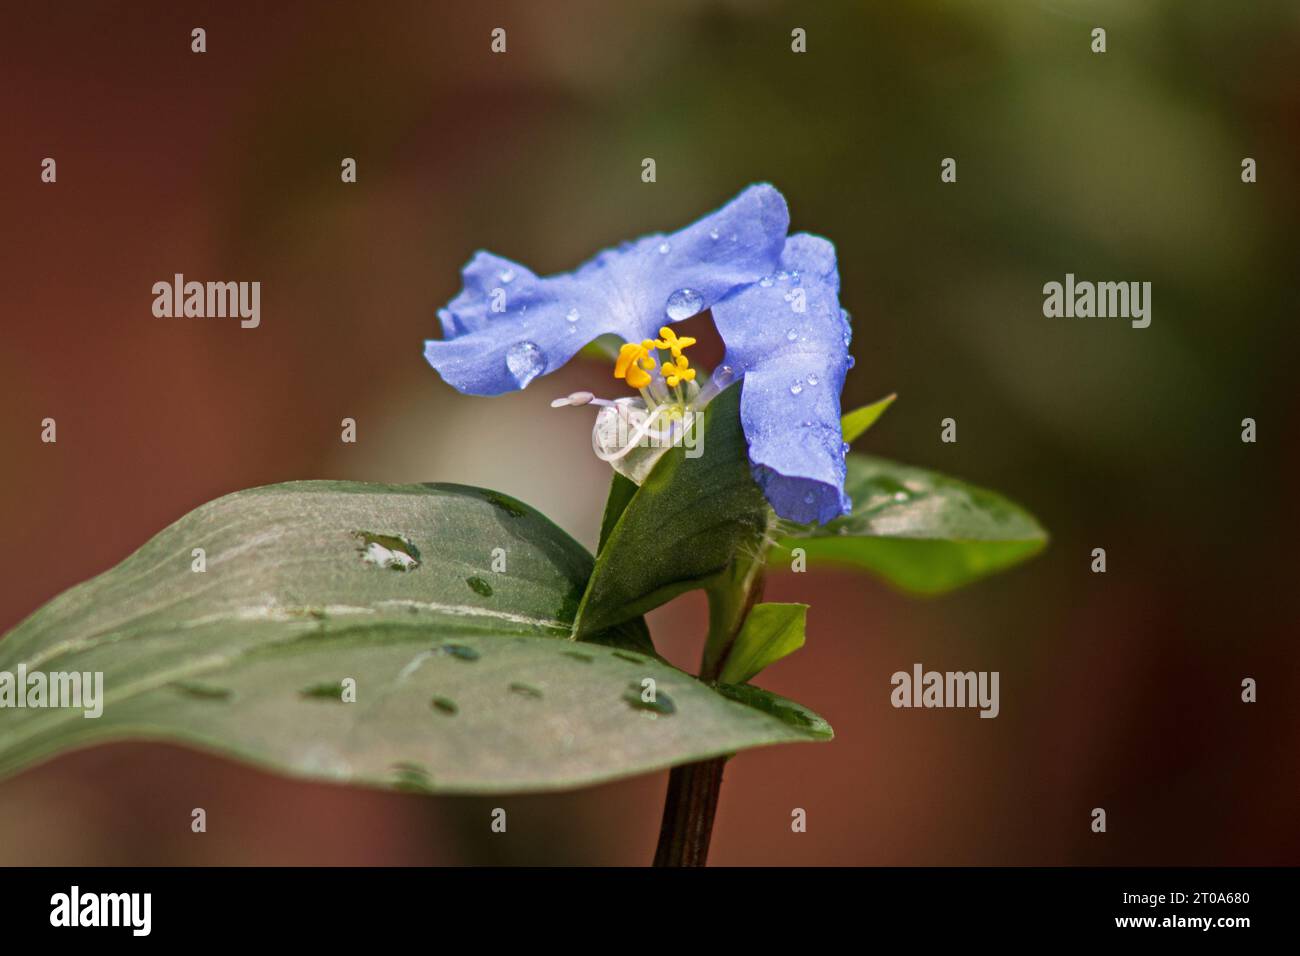 Asiatic dayflower Commelina communis flower plant on a natural background Stock Photo